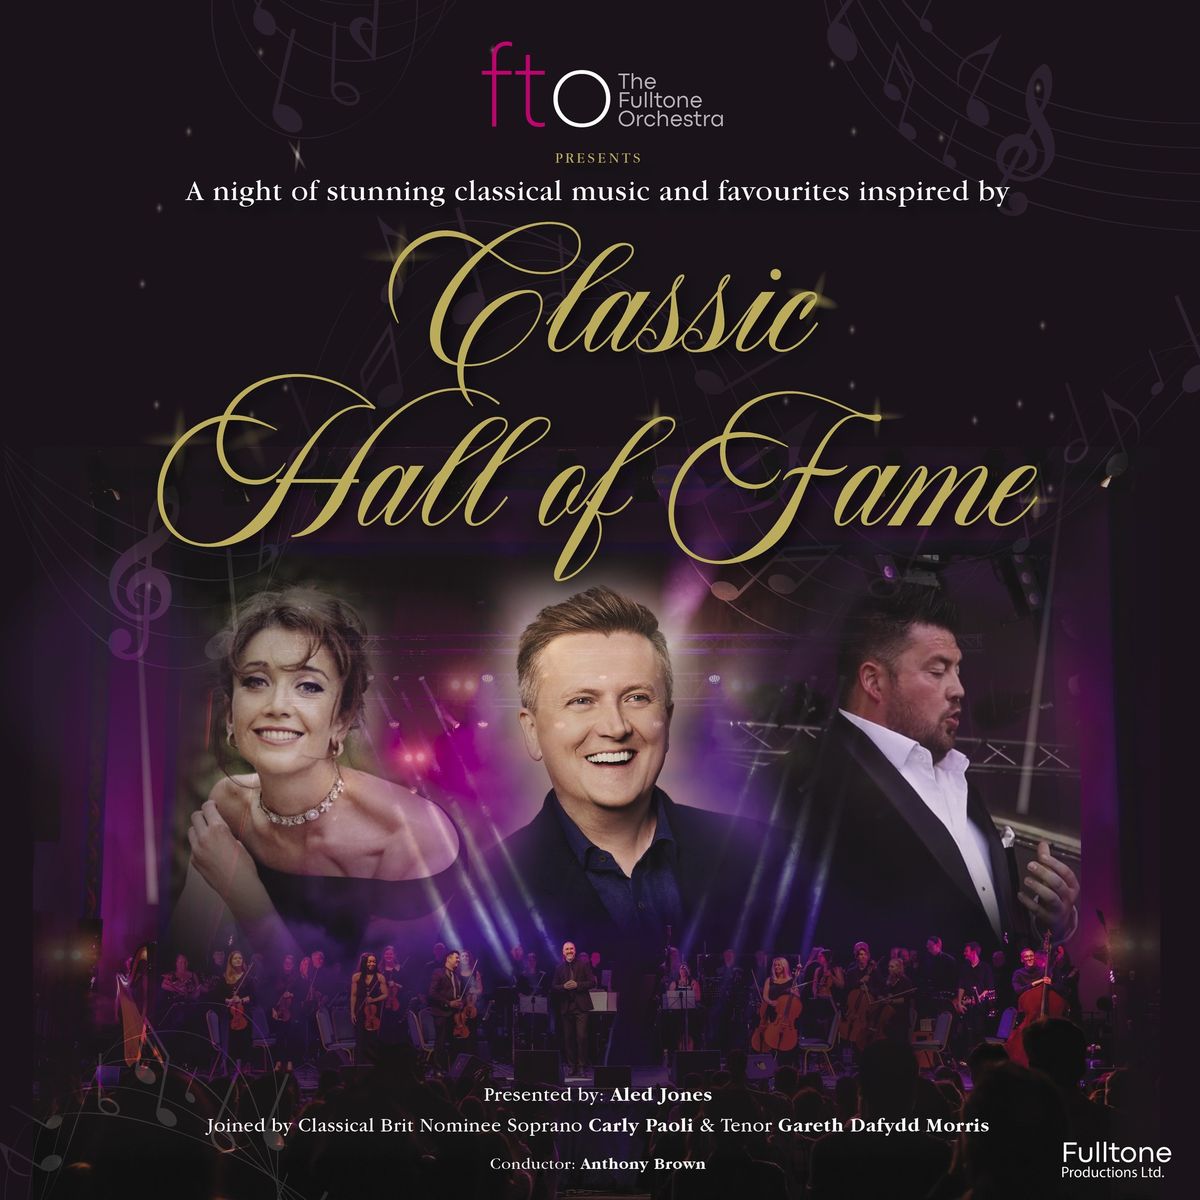 Fulltone Present Classic Hall of Fame with Aled Jones and Carly Paoli